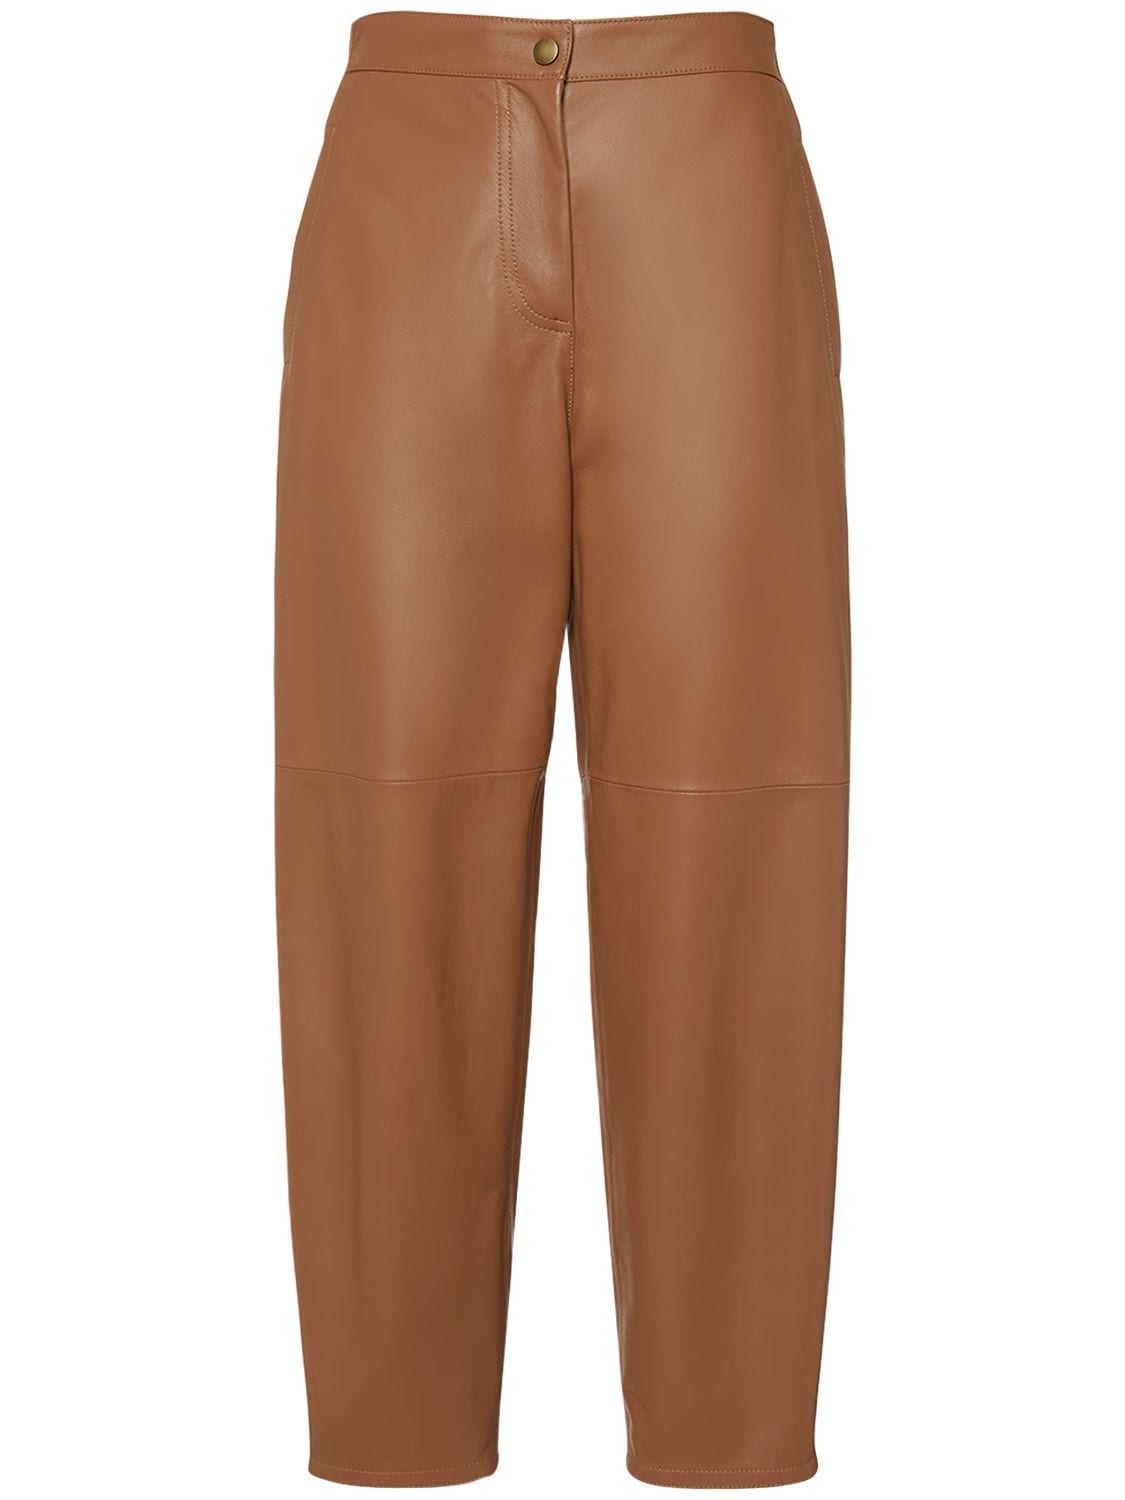 Revere High Rise Leather Pants